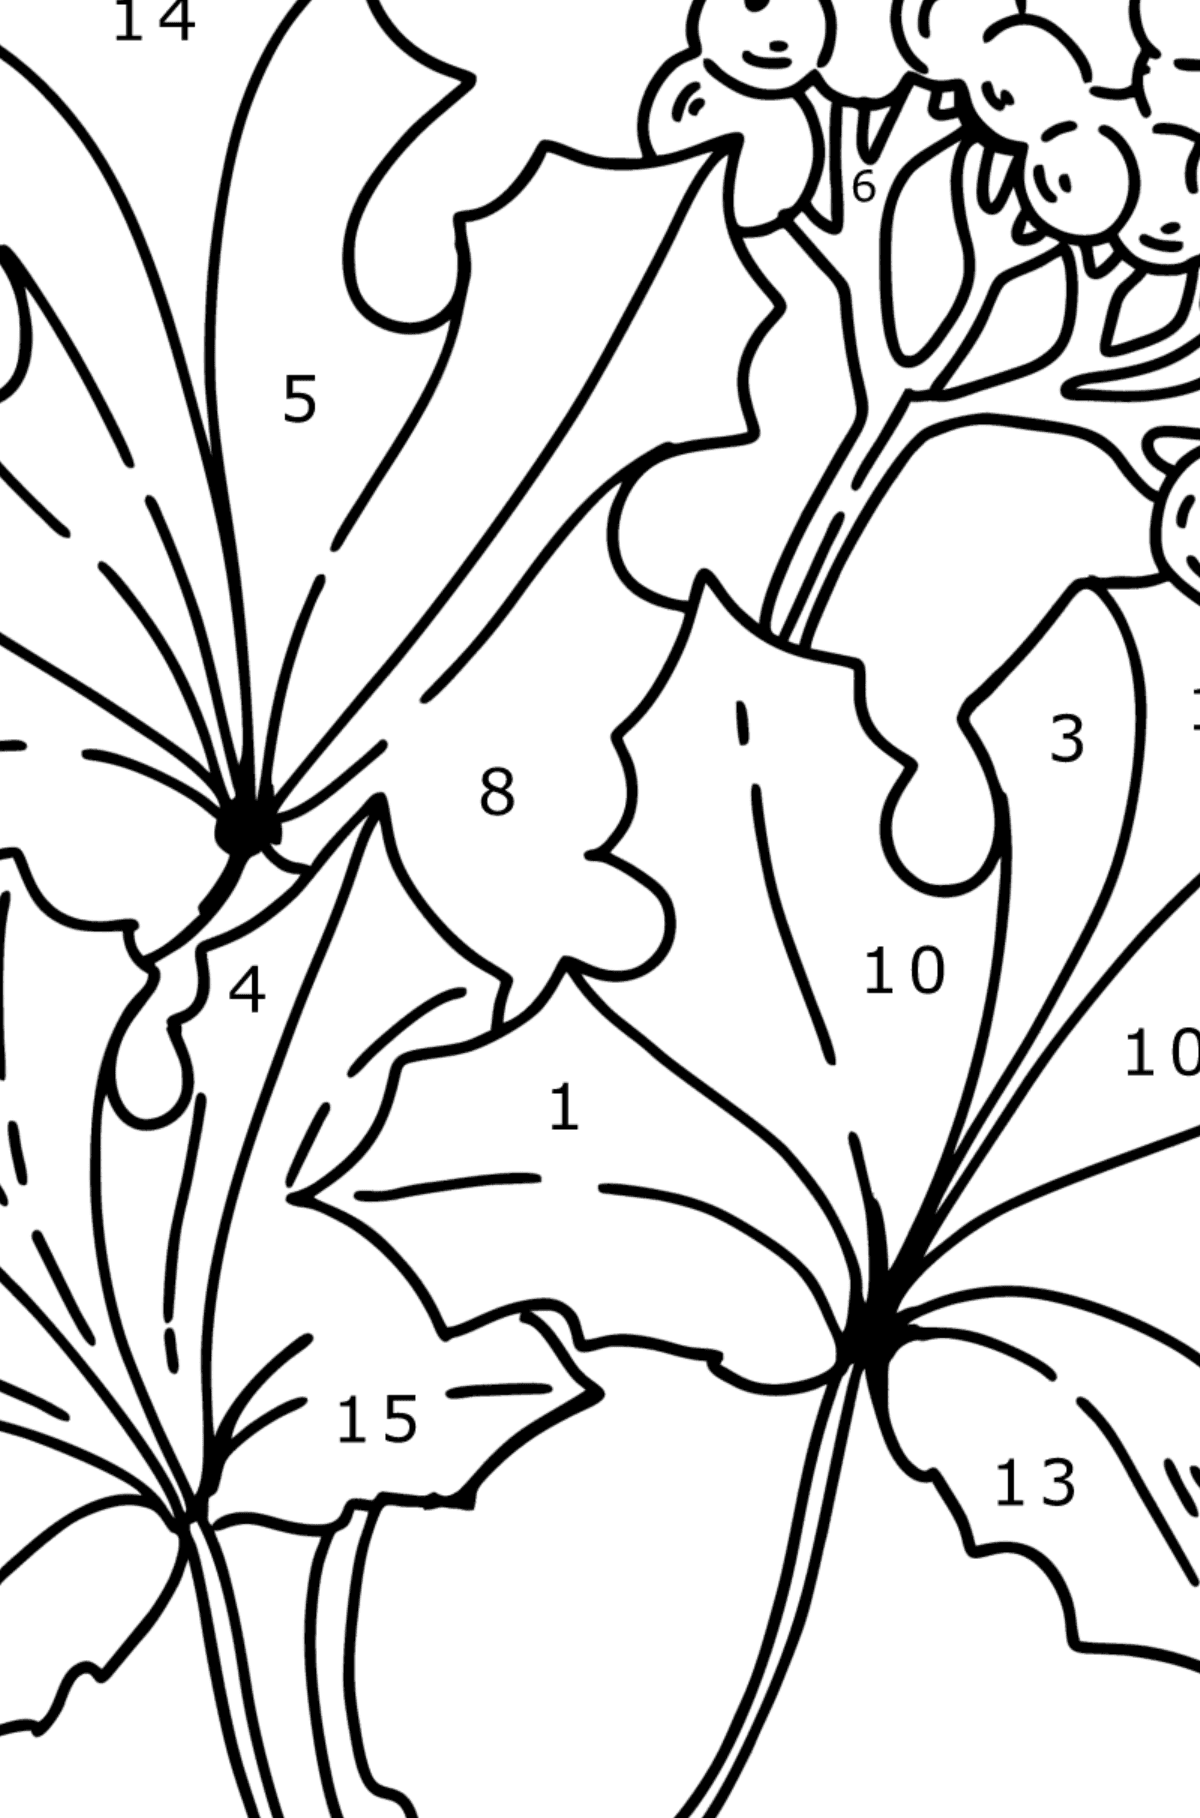 Coloring page - Maple Leaves and Elderberries - Coloring by Numbers for Kids